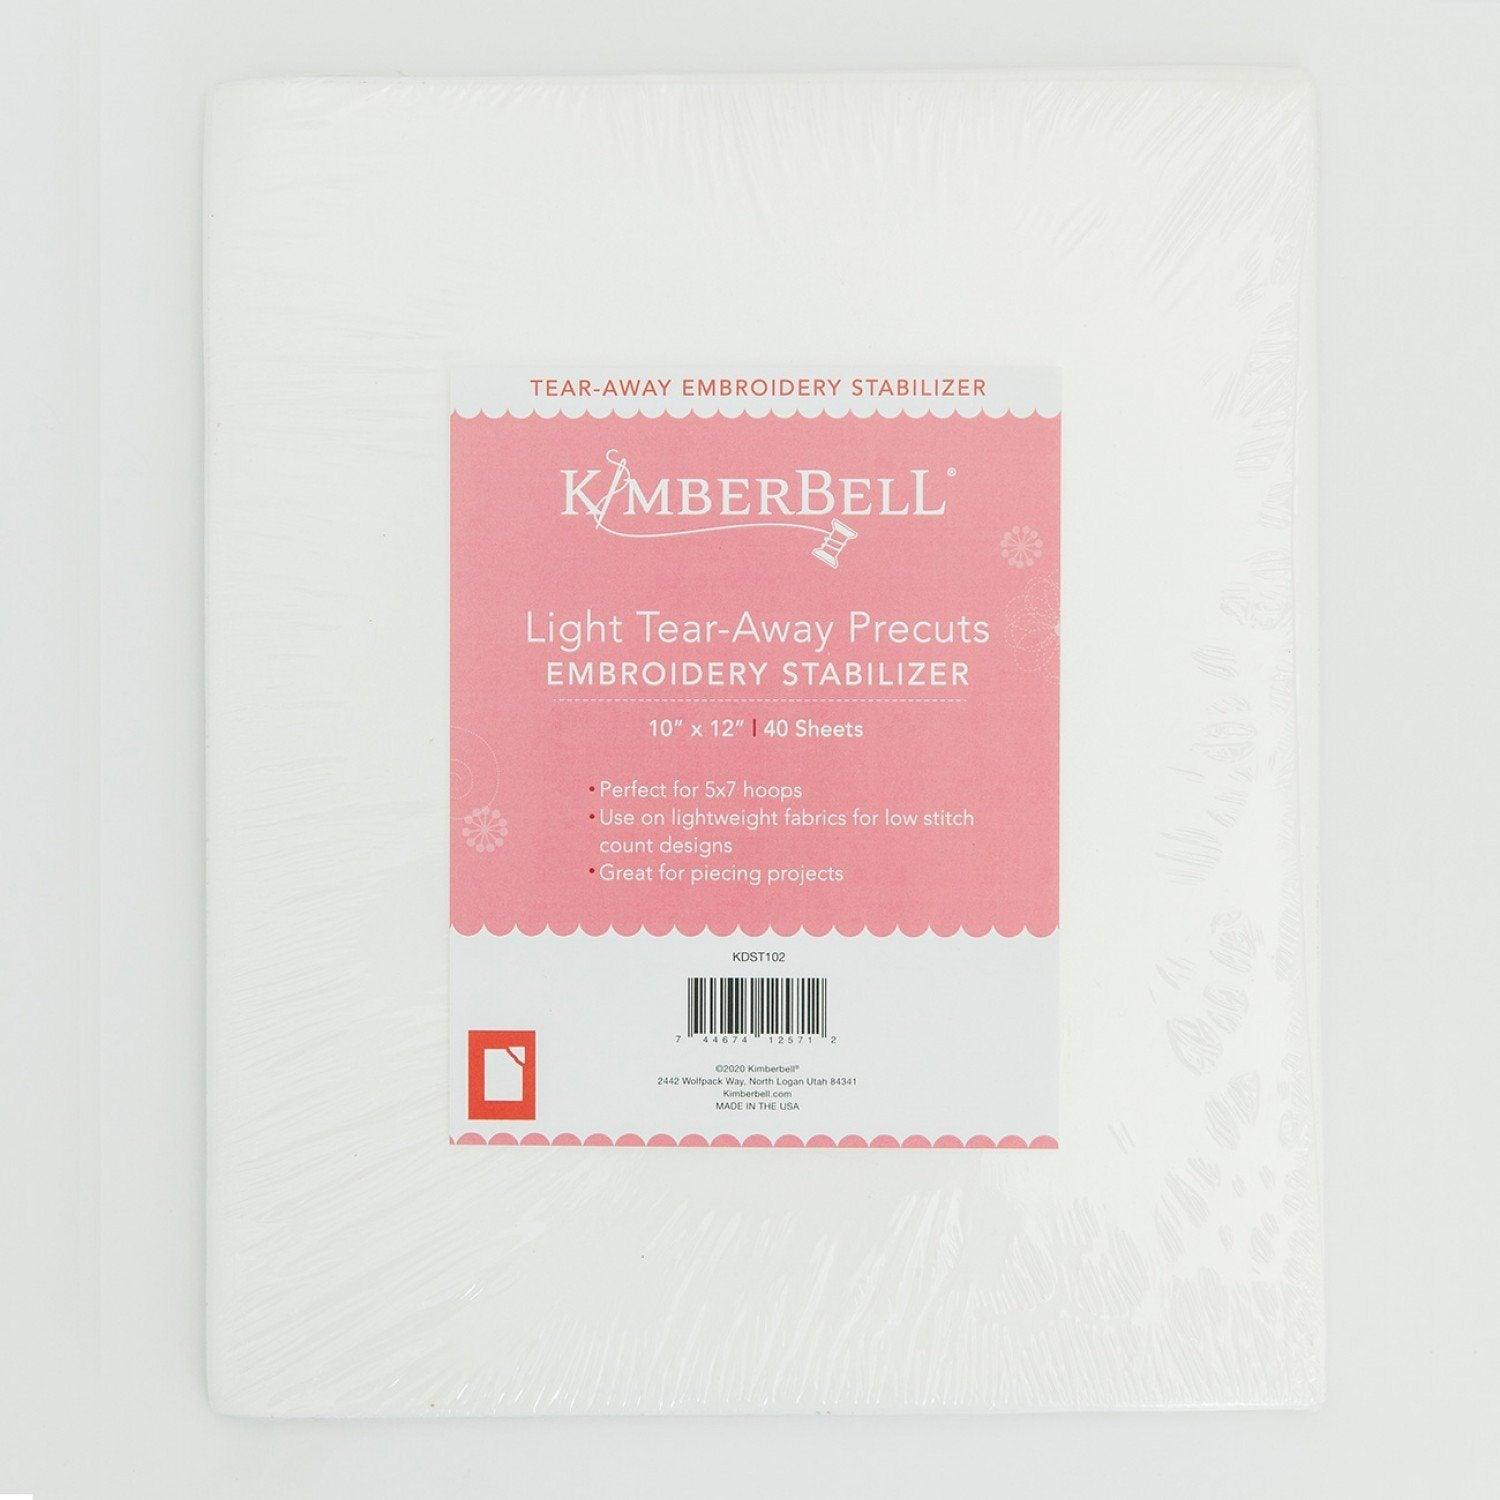 Tear-Away Stabilizer - Light - 12"x10" Precuts - Package of 40 - Kimberbell - Kawartha Quilting and Sewing LTD.